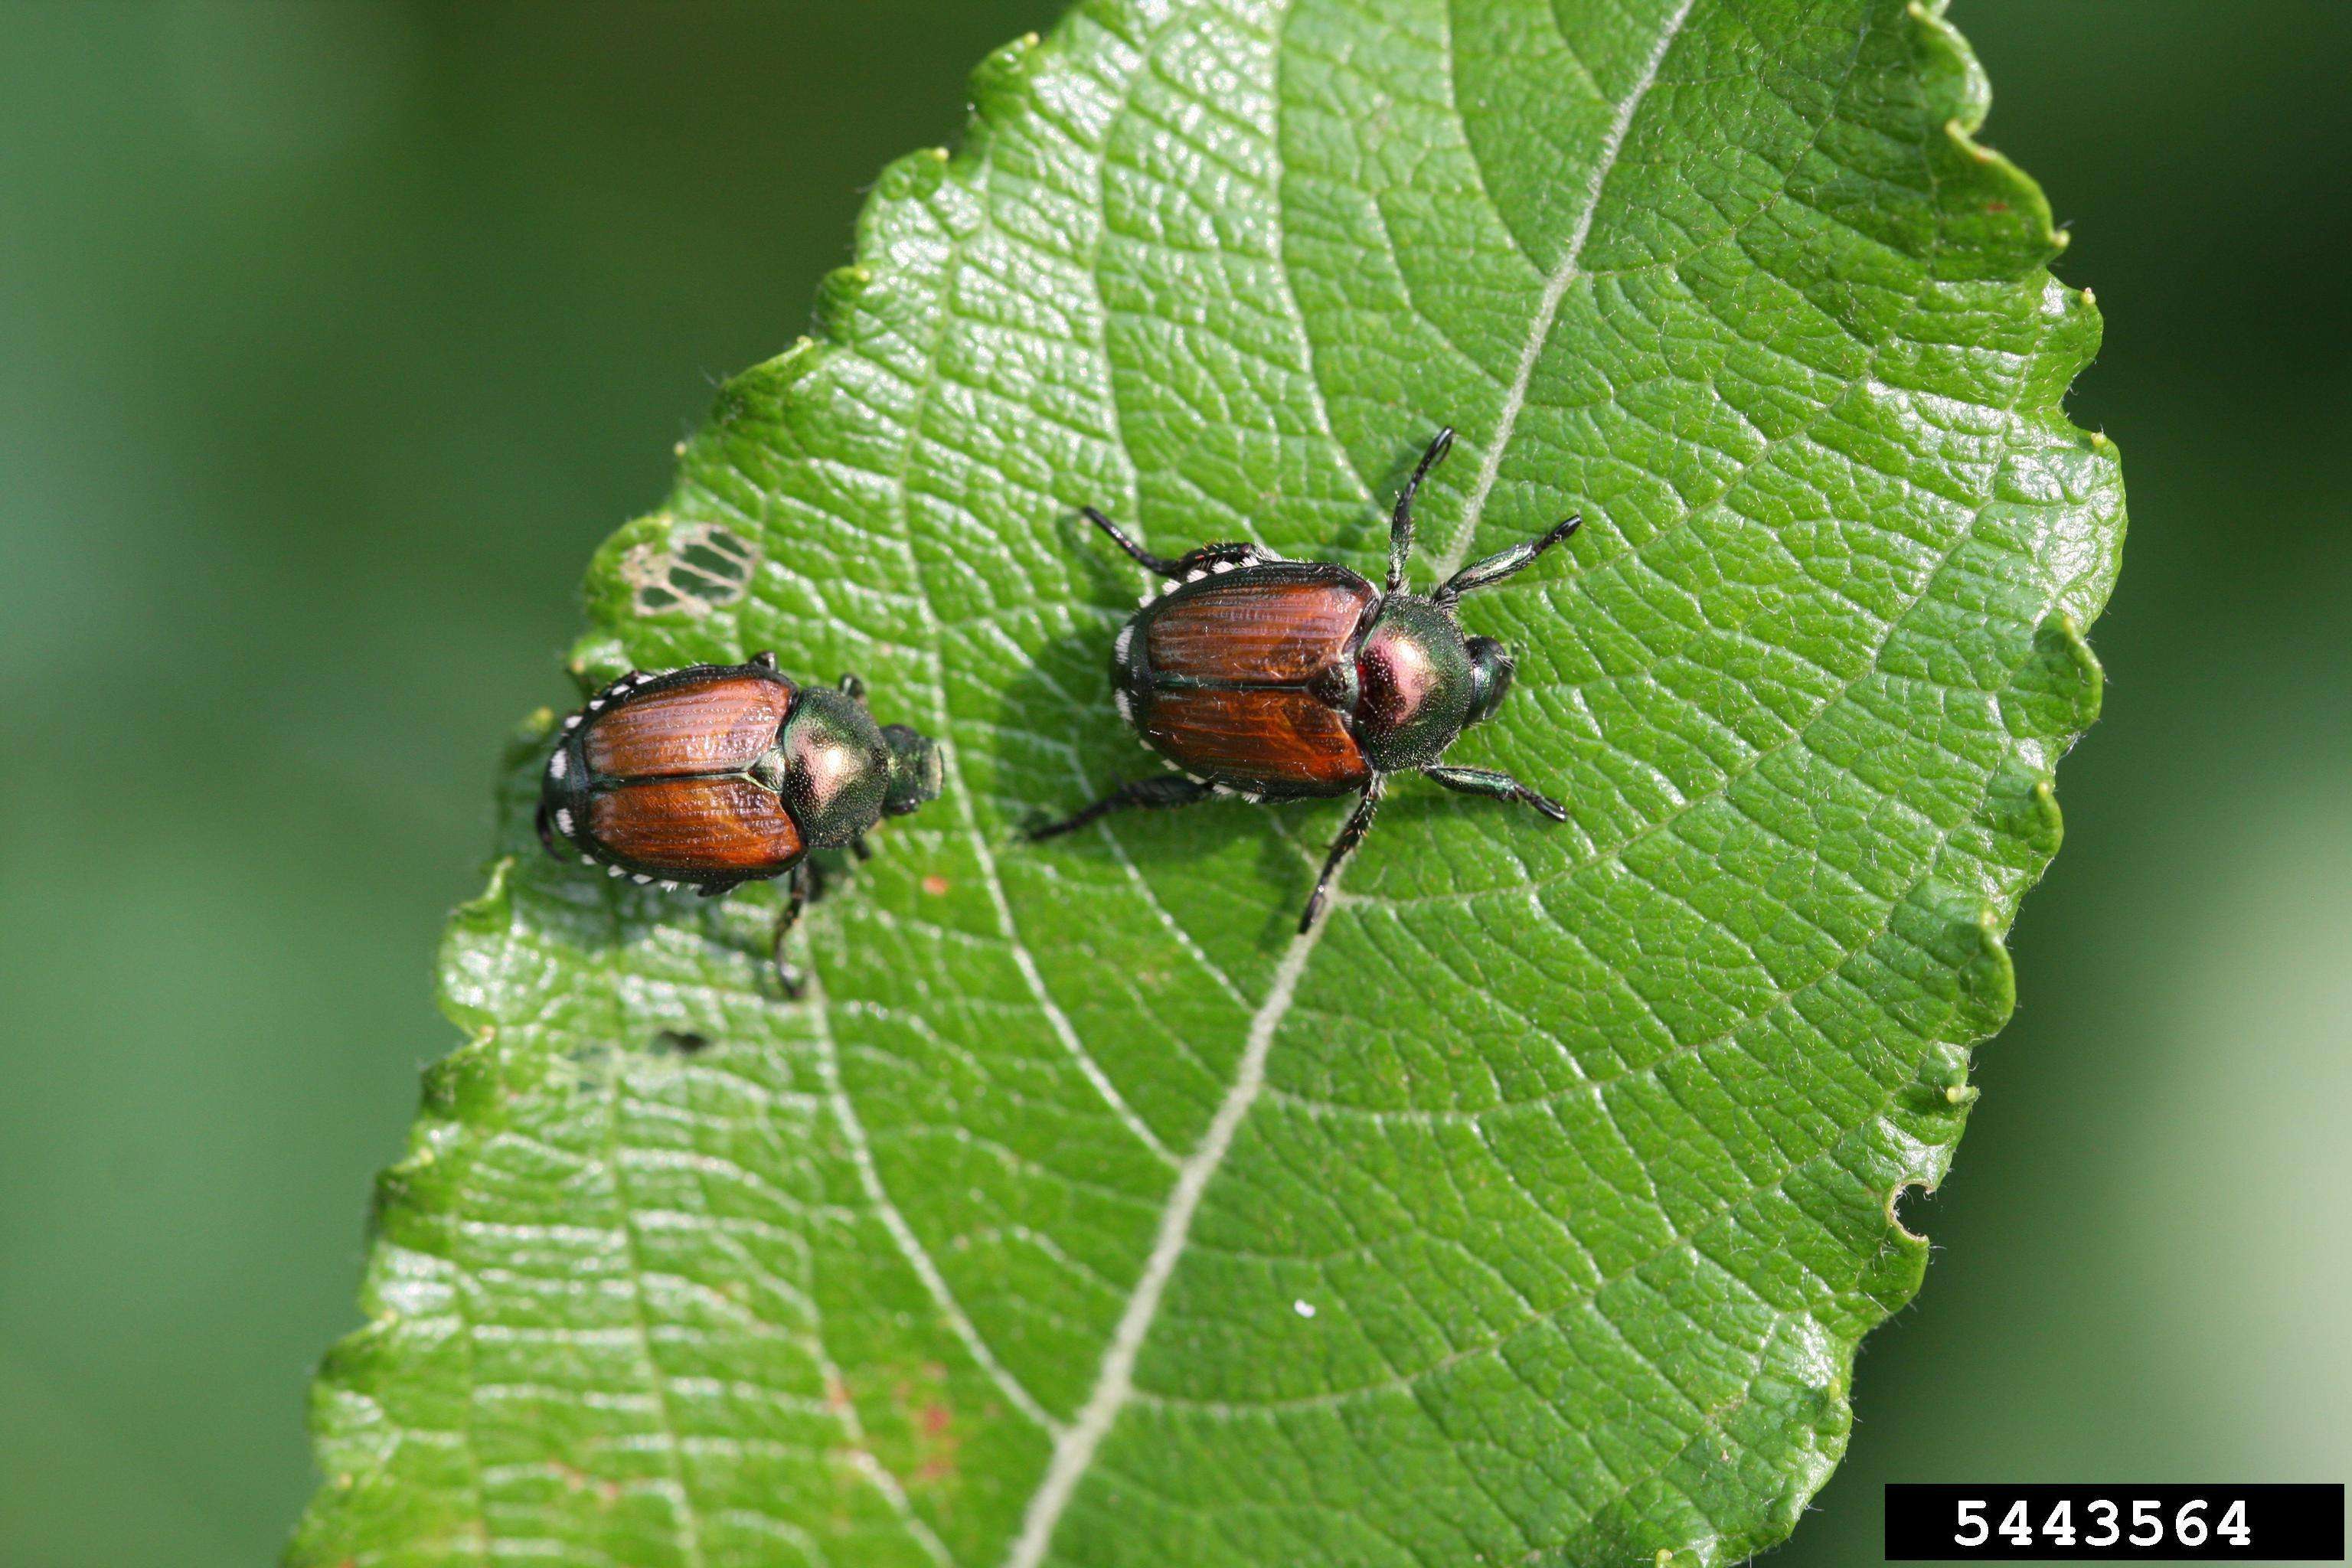 Two oval-shaped beetles approximately one-third to one-half inch long and about one-fourth inch wide with metallic green bodies and bronze or coppery-brown wings.